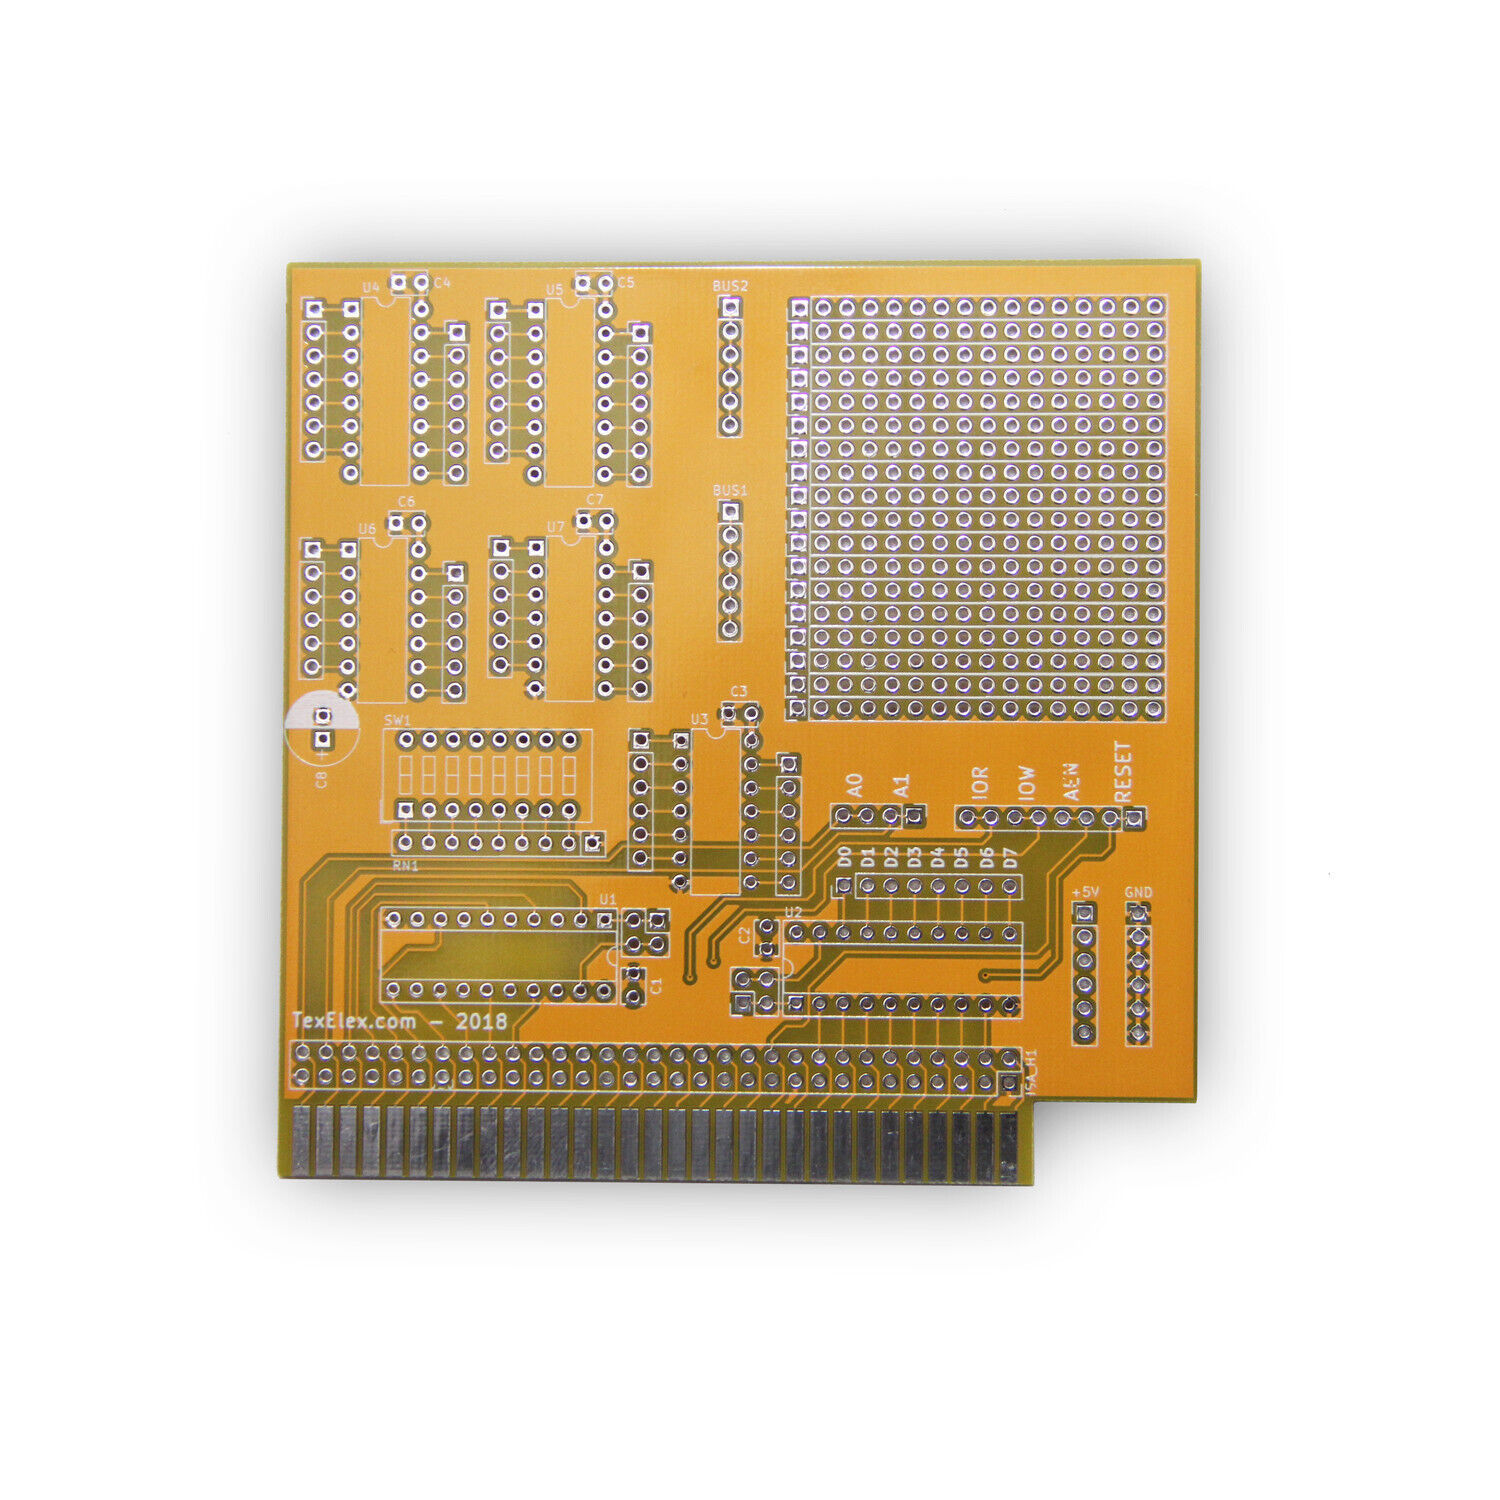 TexElec's 8 Bit ISA Prototype Card v1.0 (PCB Only)